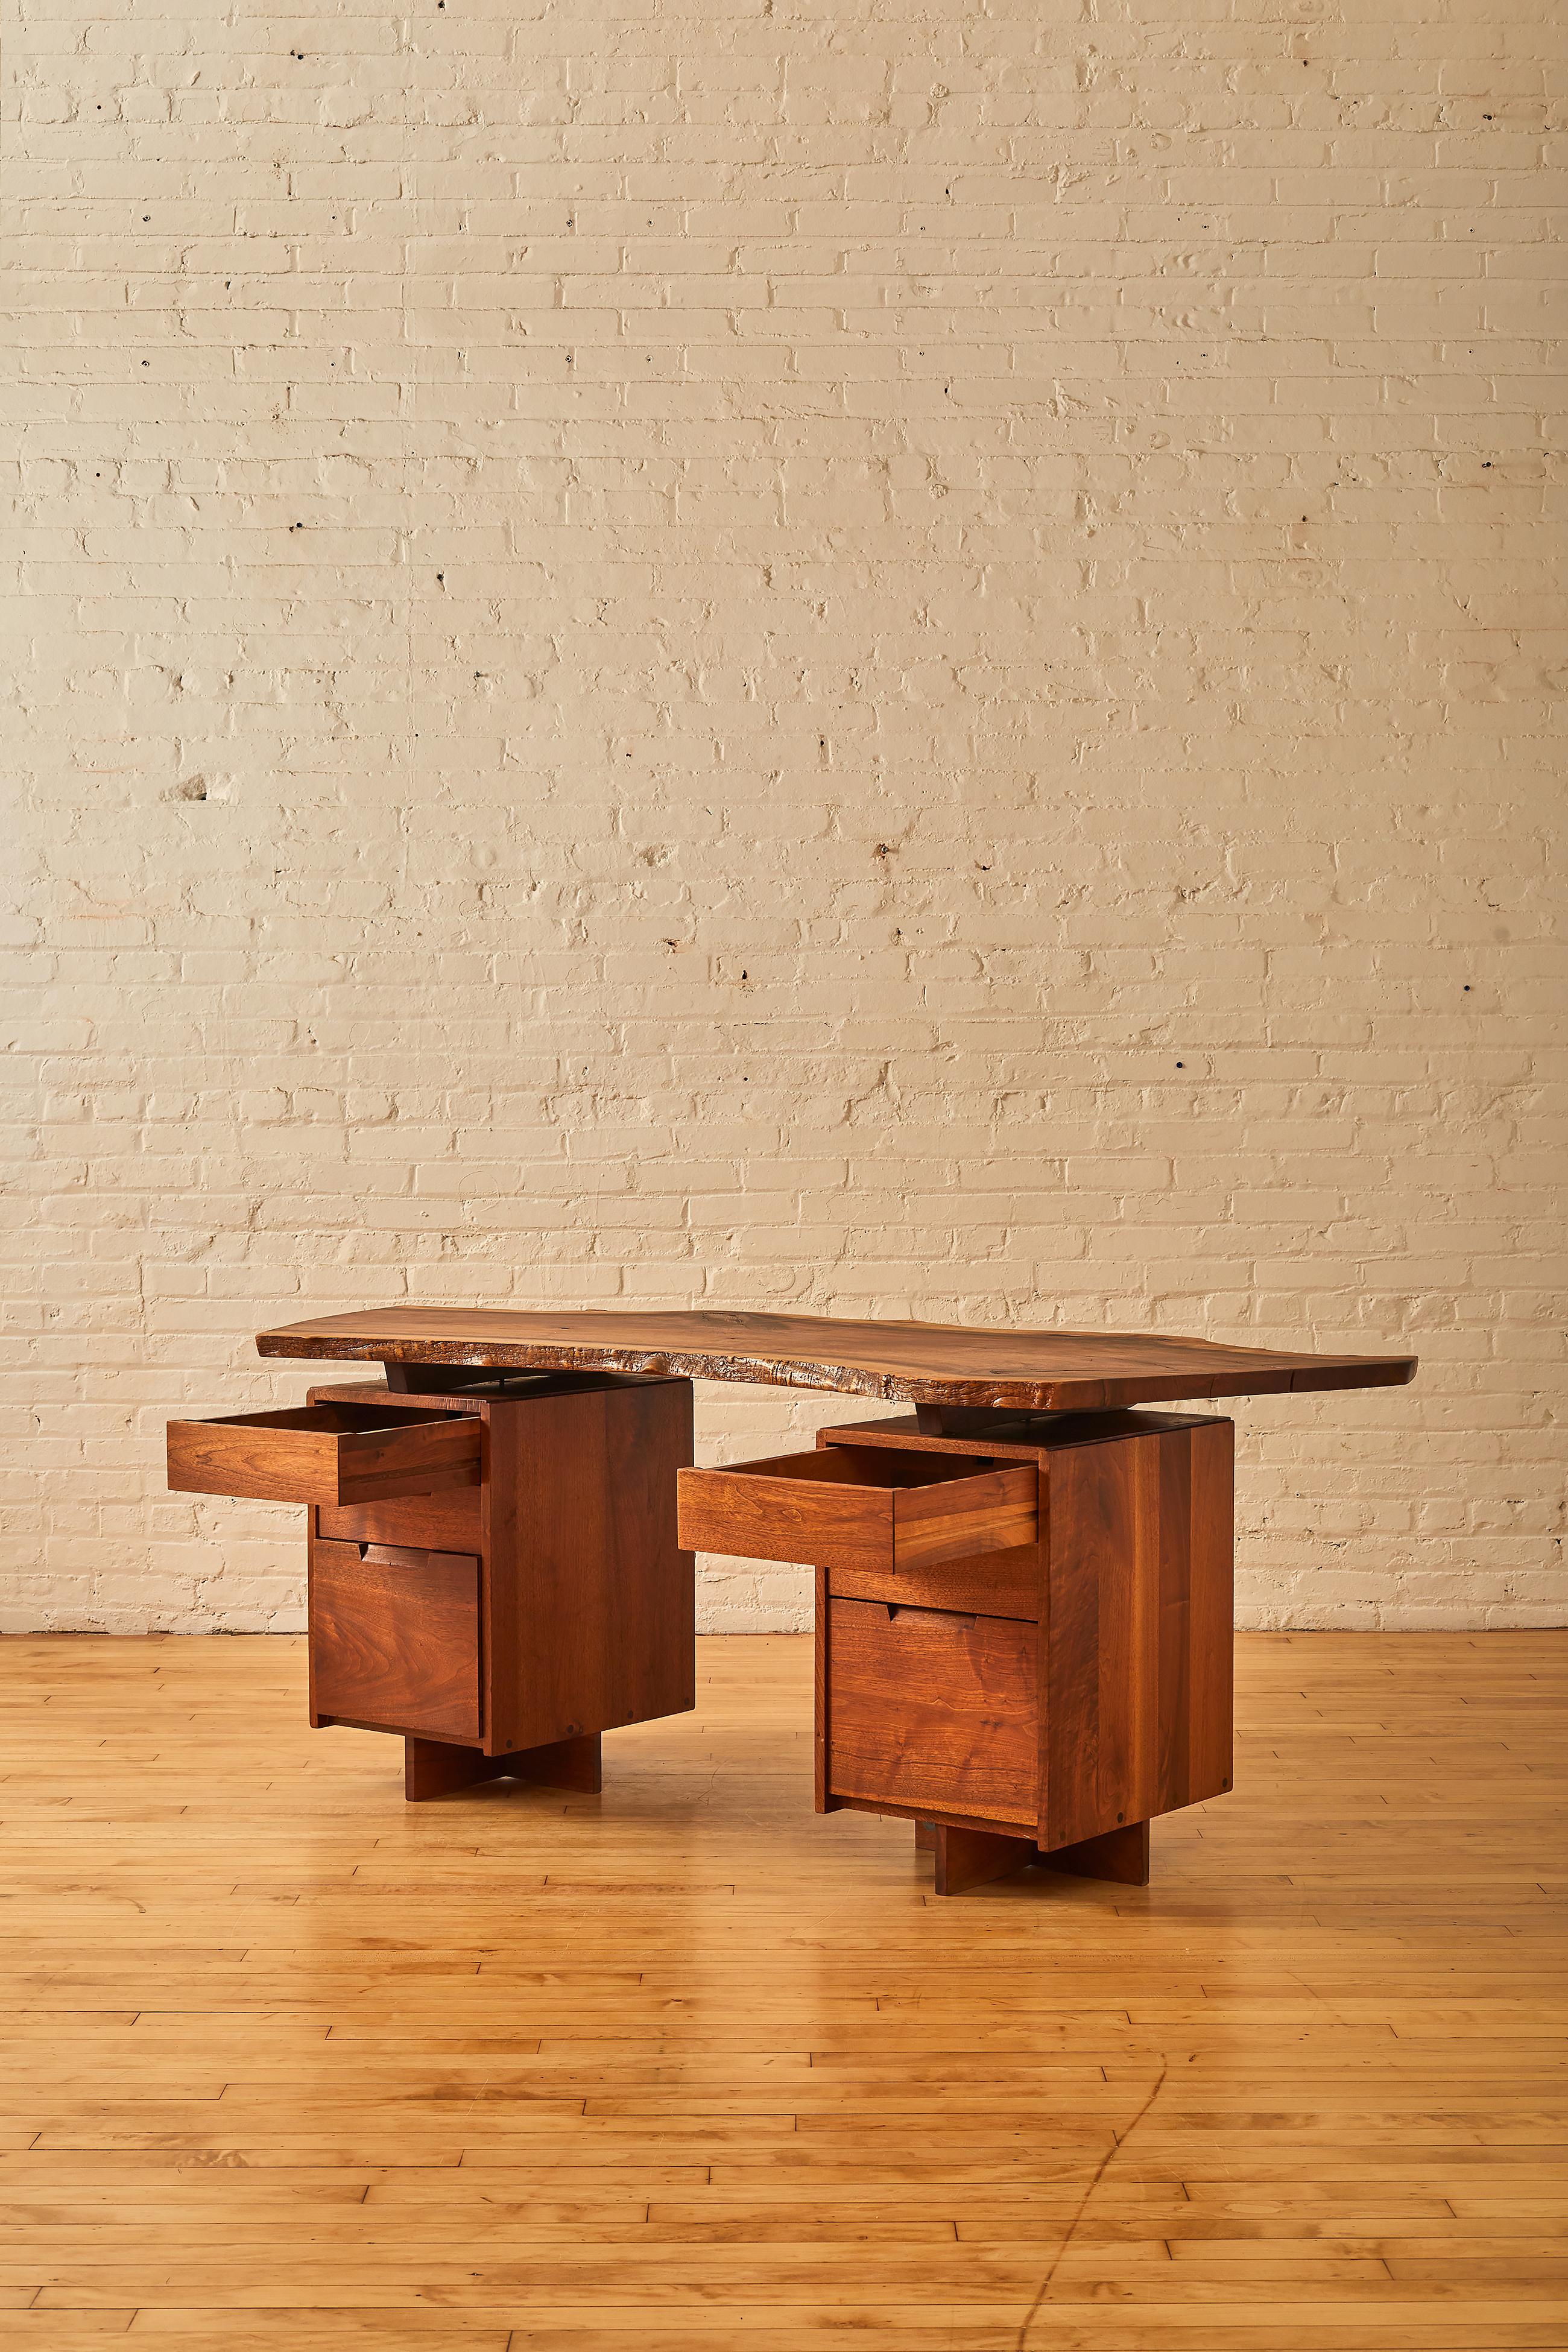 Free-edge double pedestal desk by George Nakashima in walnut with butterfly joinery on desk top. 

